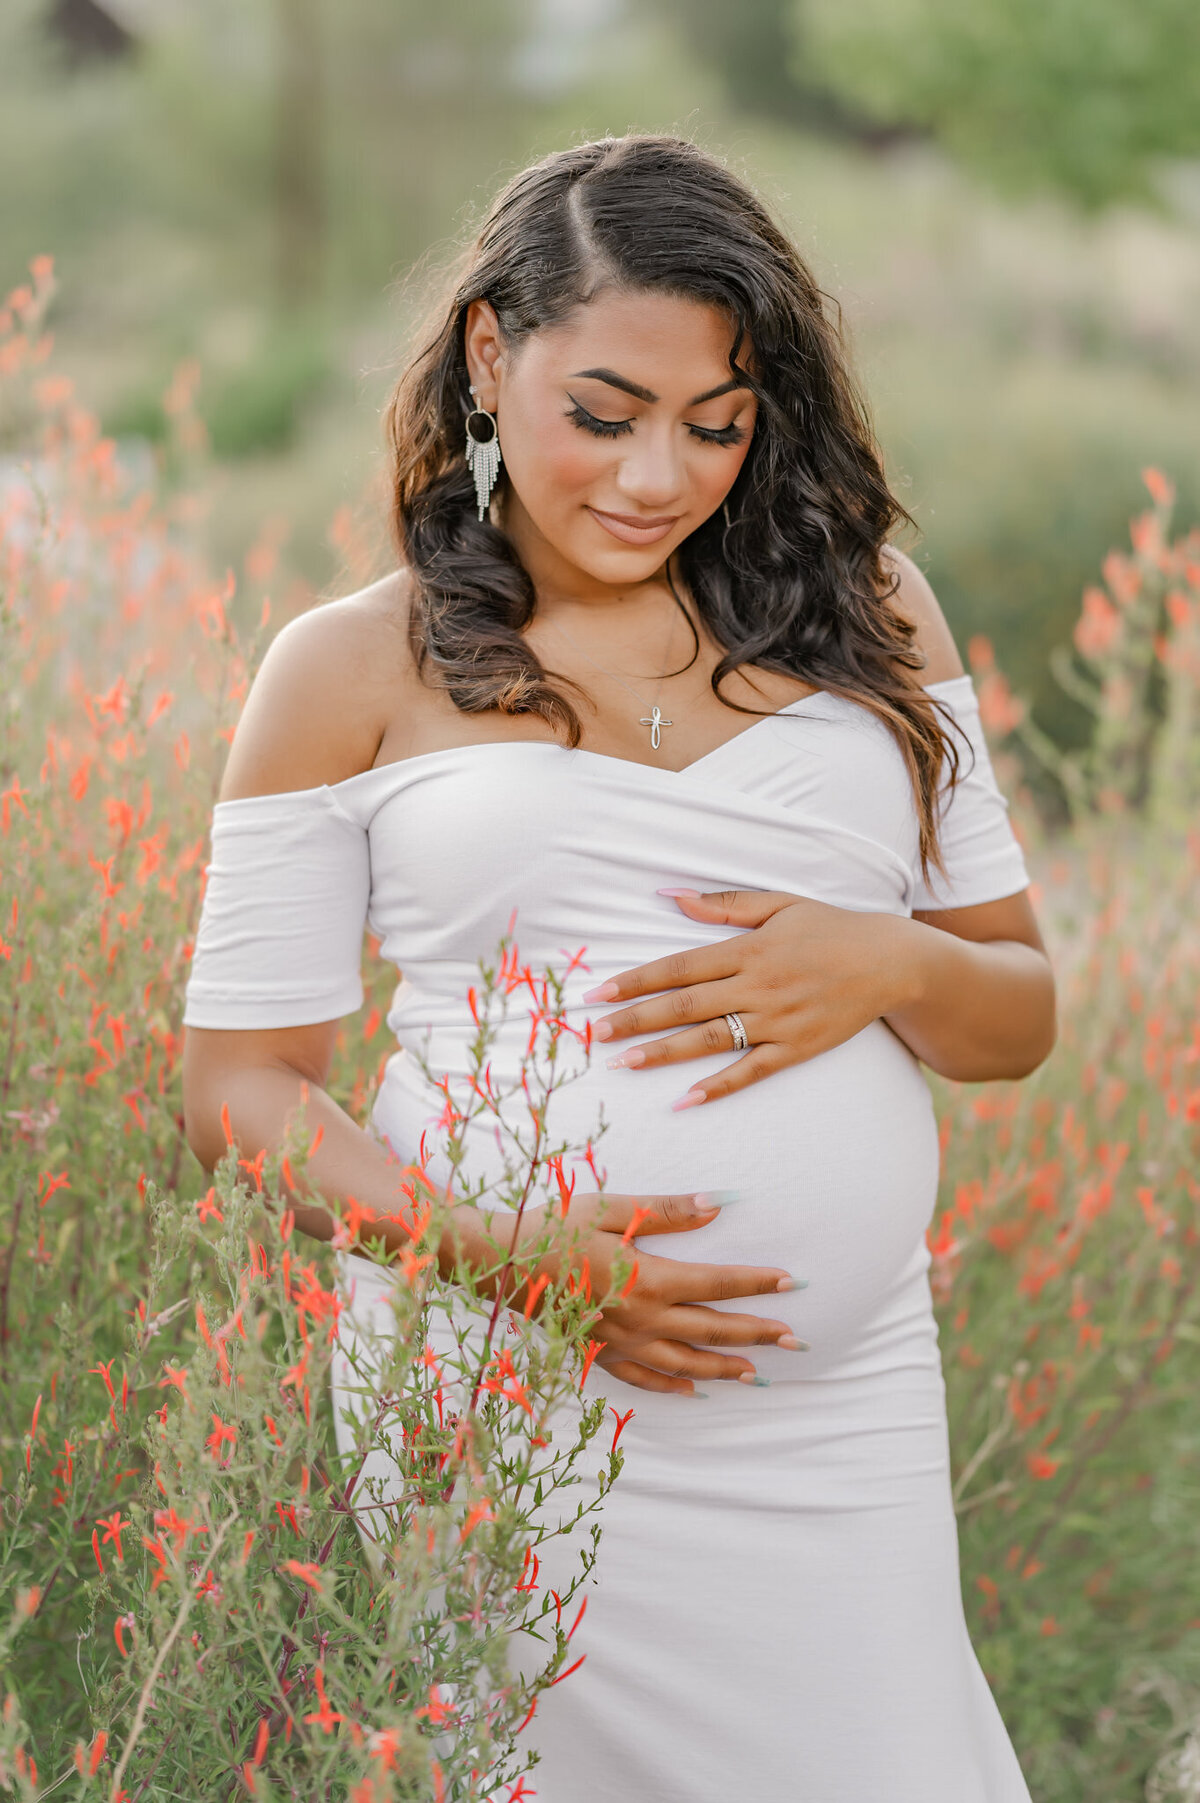 Maternity photography of an expecting woman gazing at her belly, surrounded by red flowers.